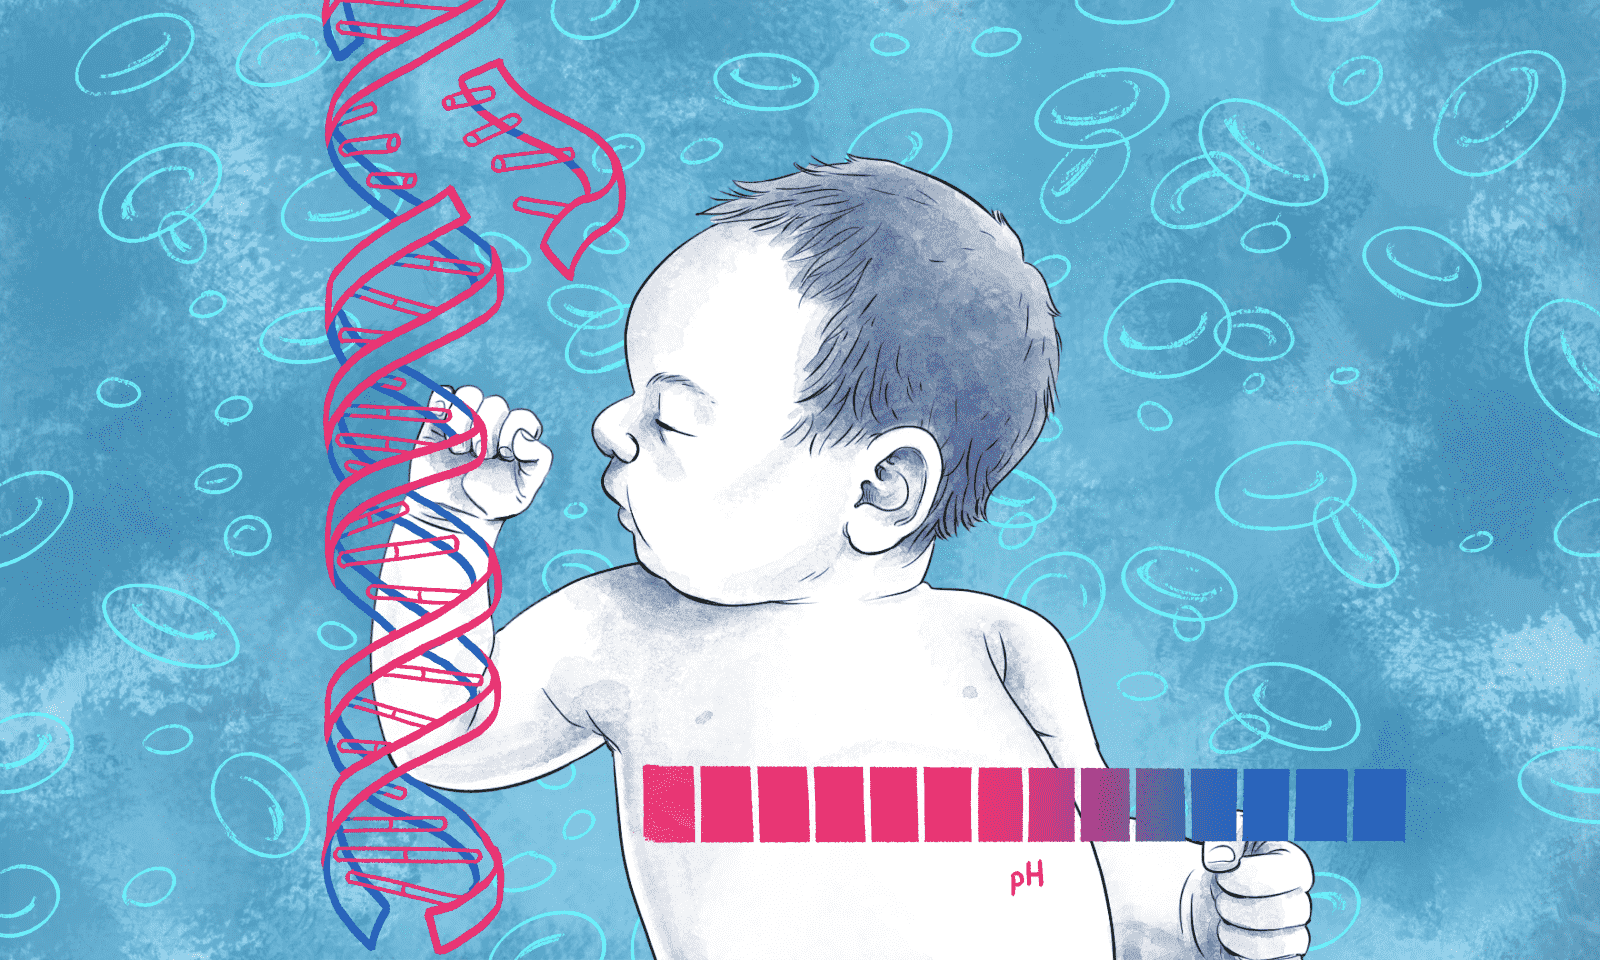 Illustration of the newborn baby patient with pH level marker and DNA double helix symbols.